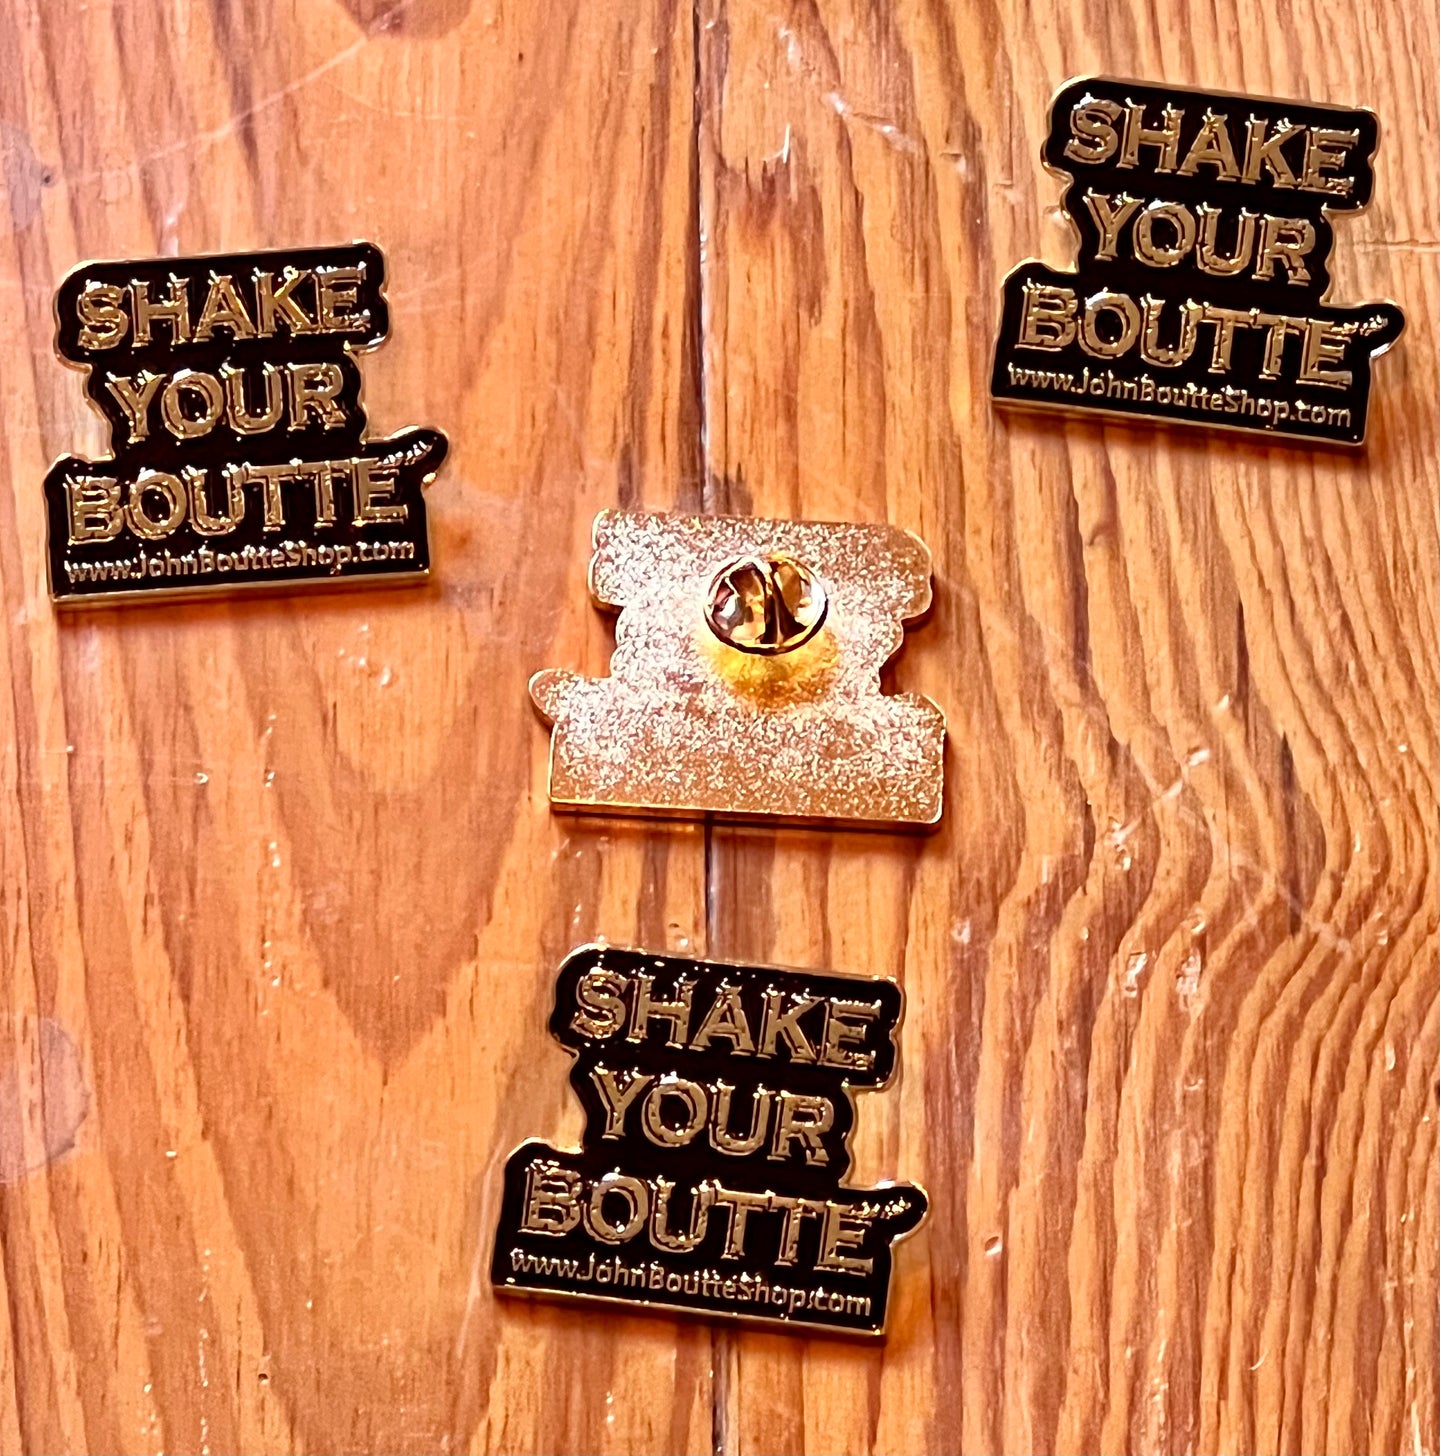 NEW Shake Your Boutte´enamel pins!